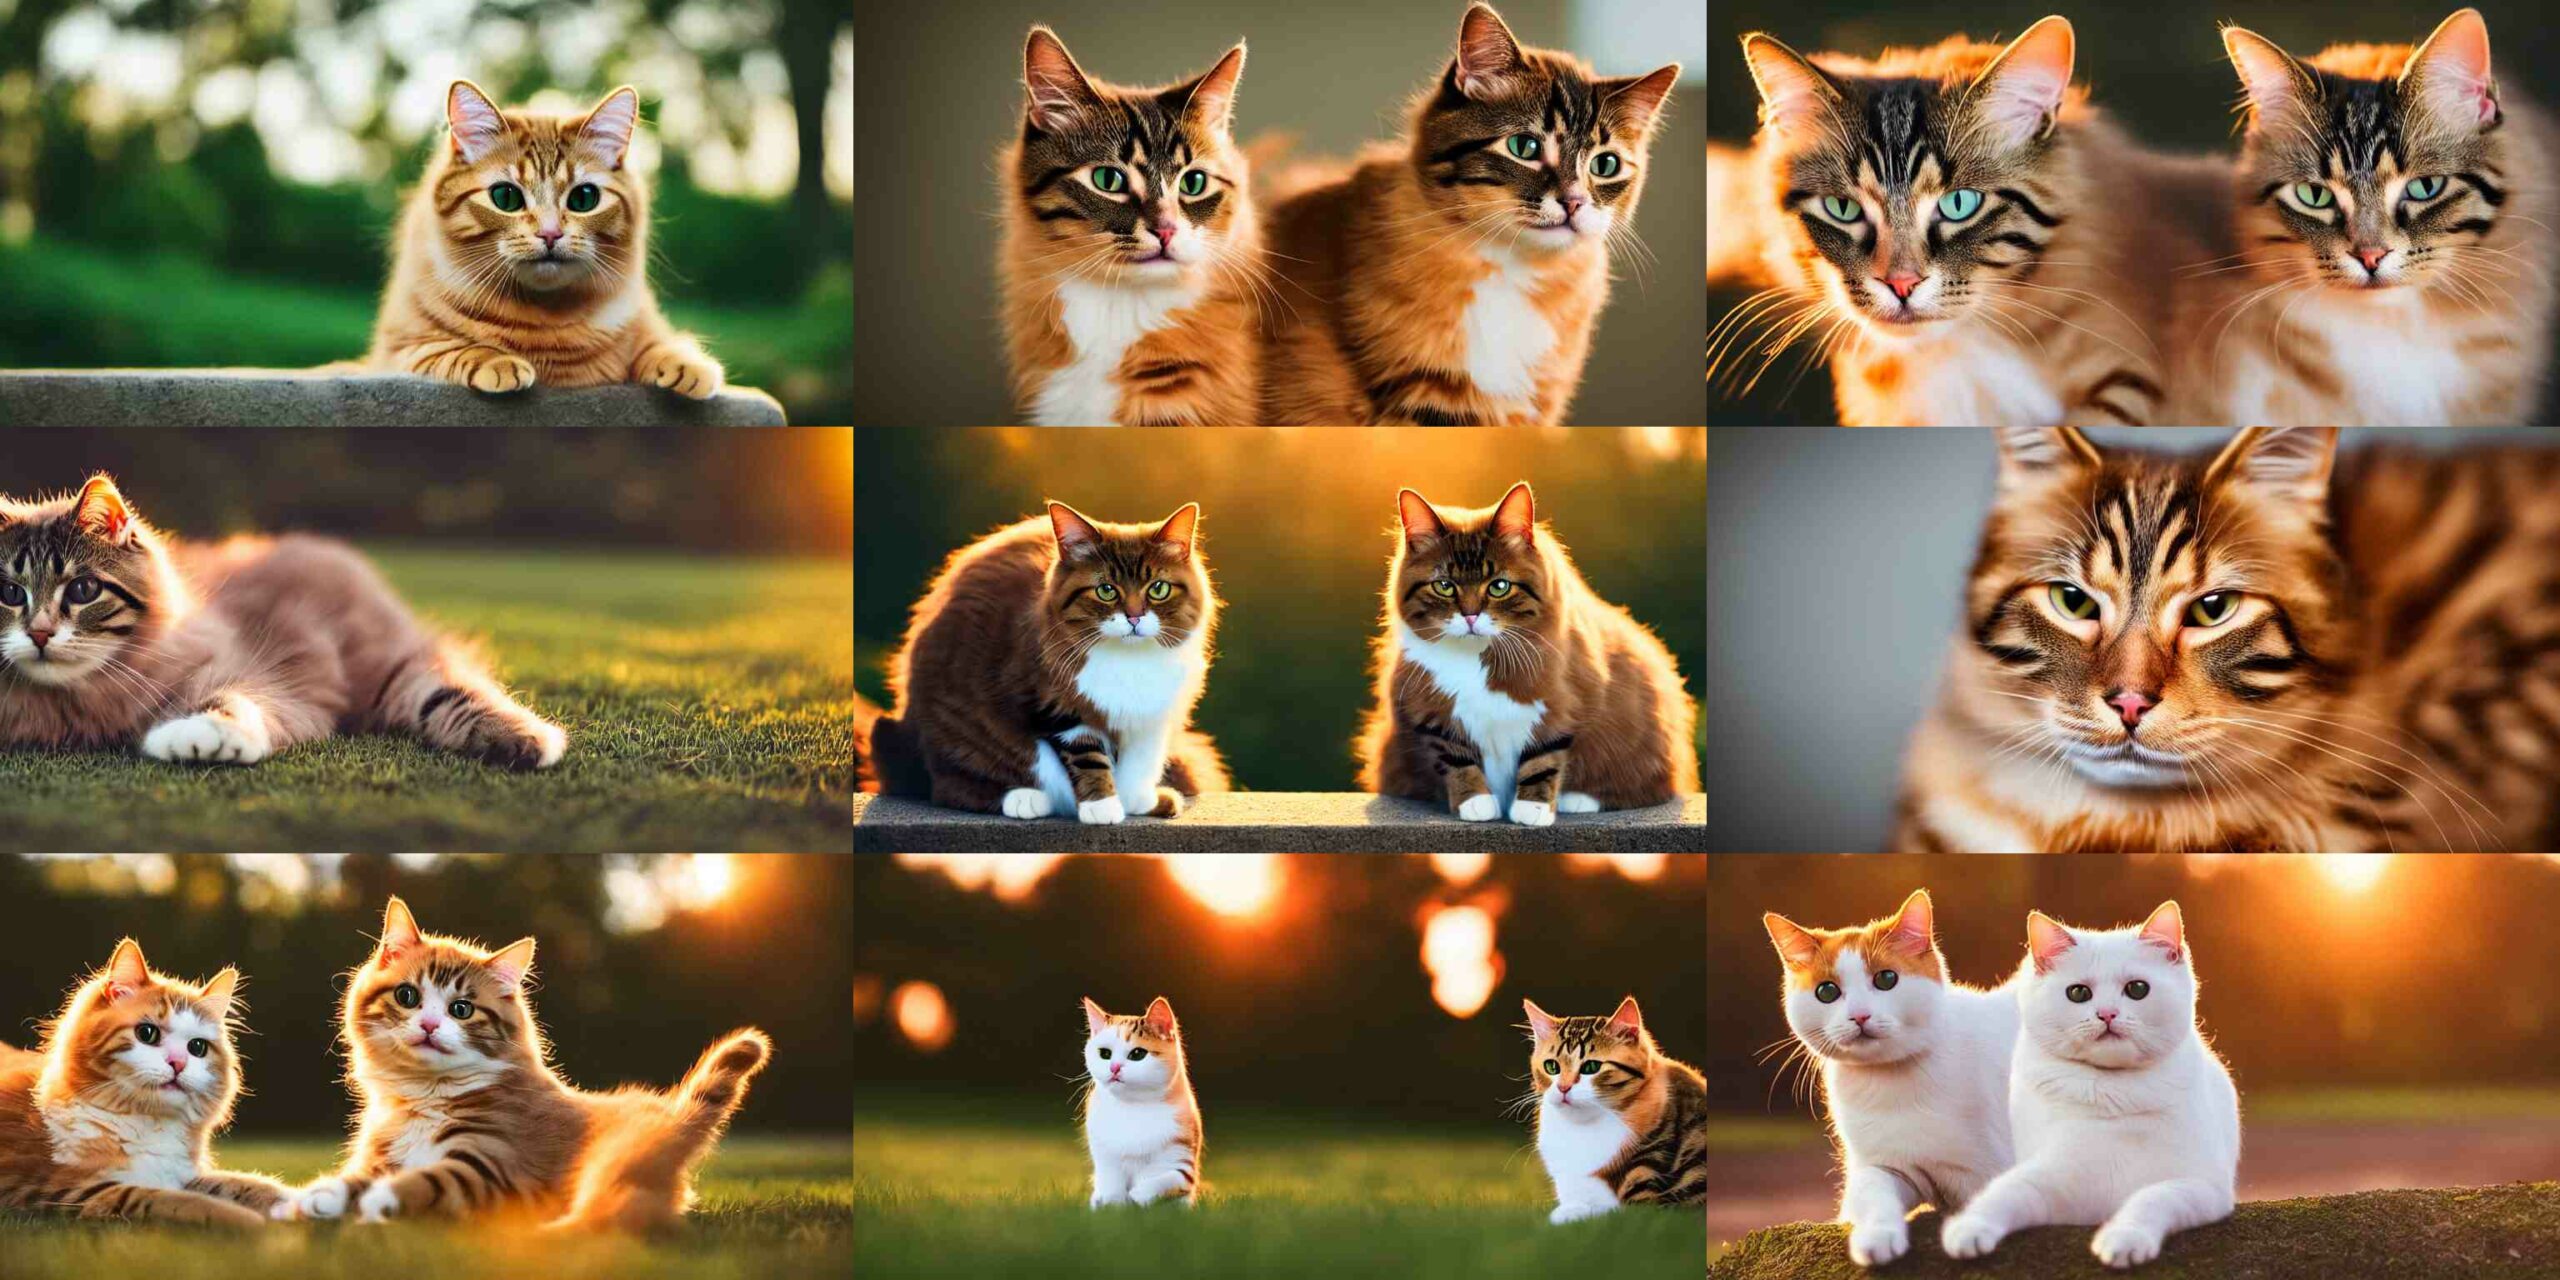 Step By Step On How To Use An API For Detecting Cats Breed In Images